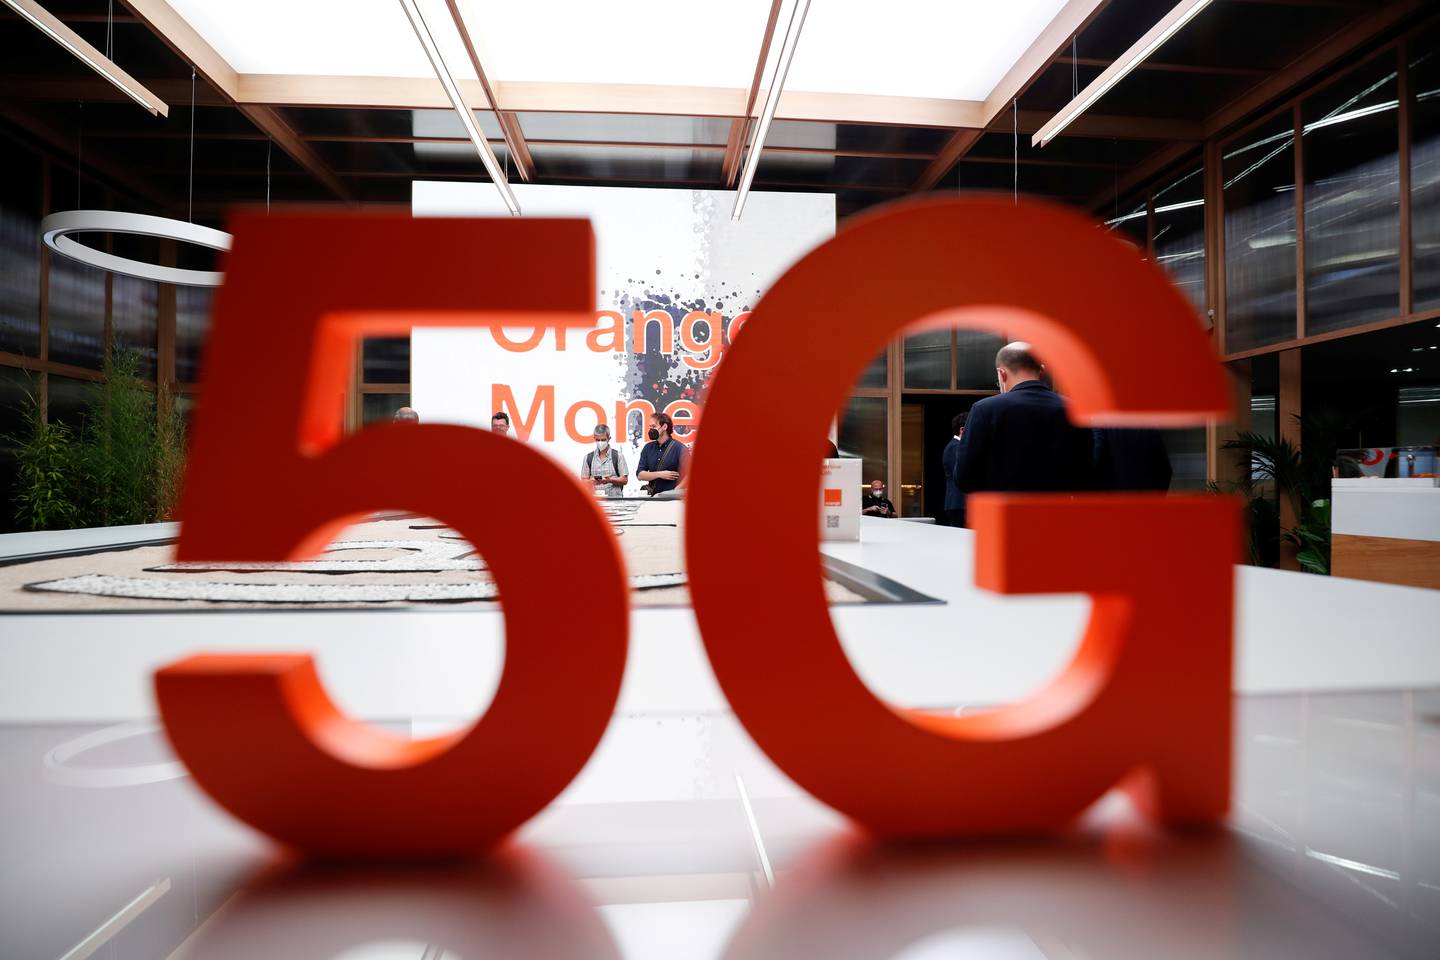 5G will bring about $13.2 trillion of economic opportunities and create 22.3 million new jobs by 2035, IHS Markit estimates. Reuters